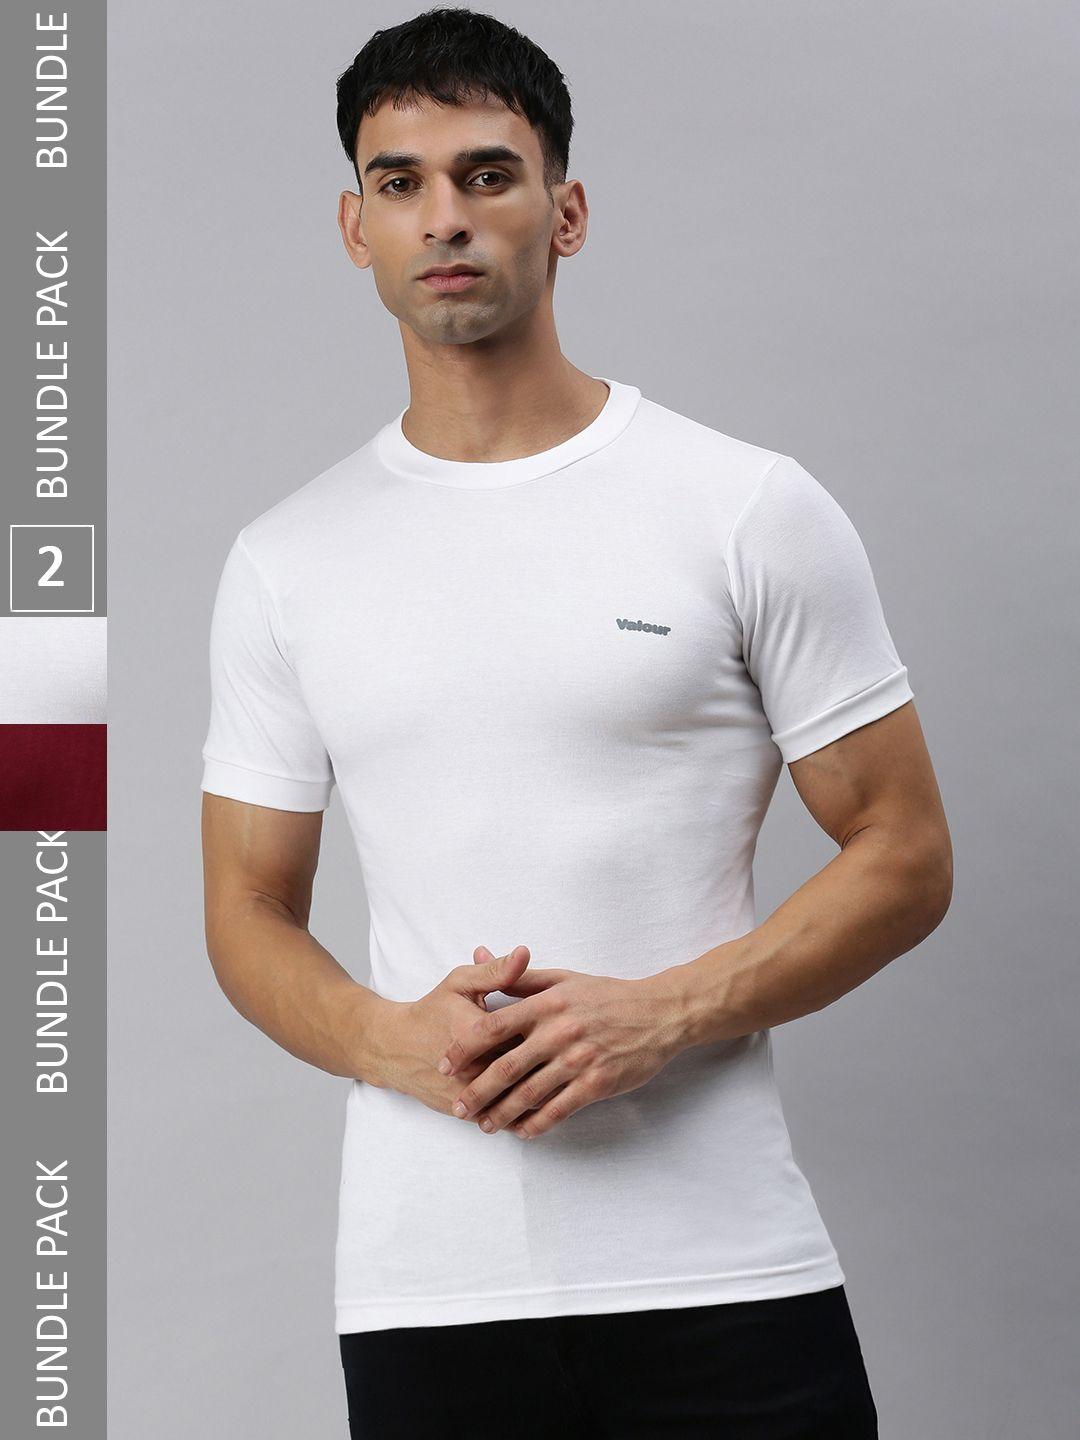 lux cozi pack of 2 slim fit cotton t-shirt